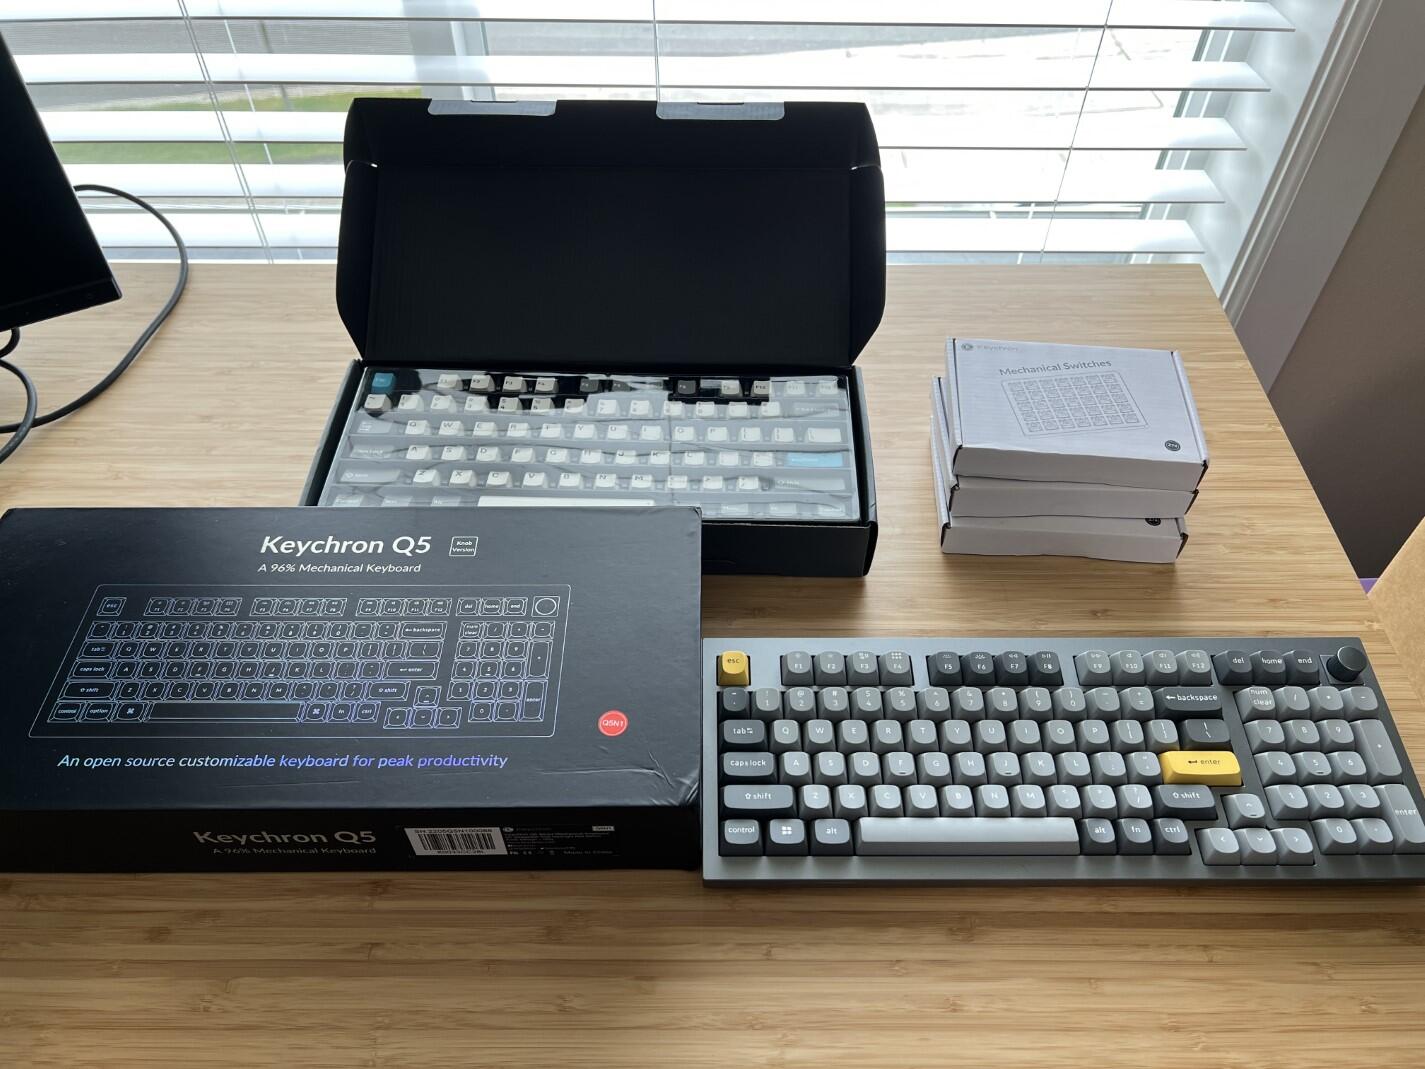 Keychron Q5 keyboard review: Greater functionality for a greater